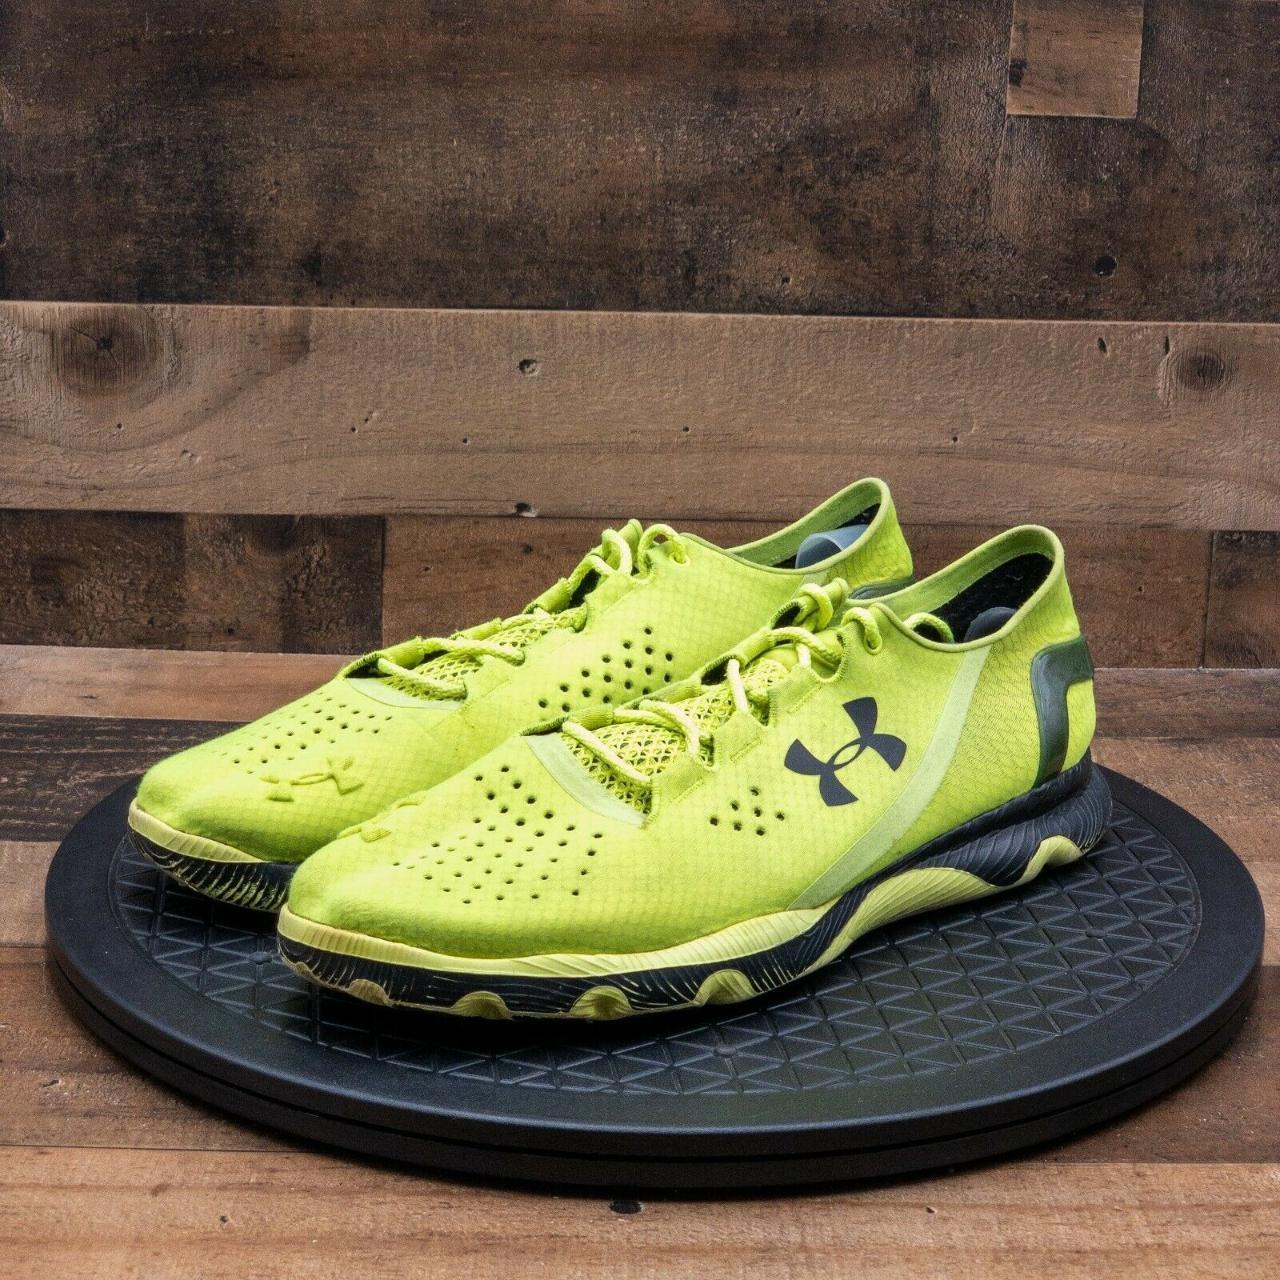 Under Armour Men's Green and Yellow Trainers (2)